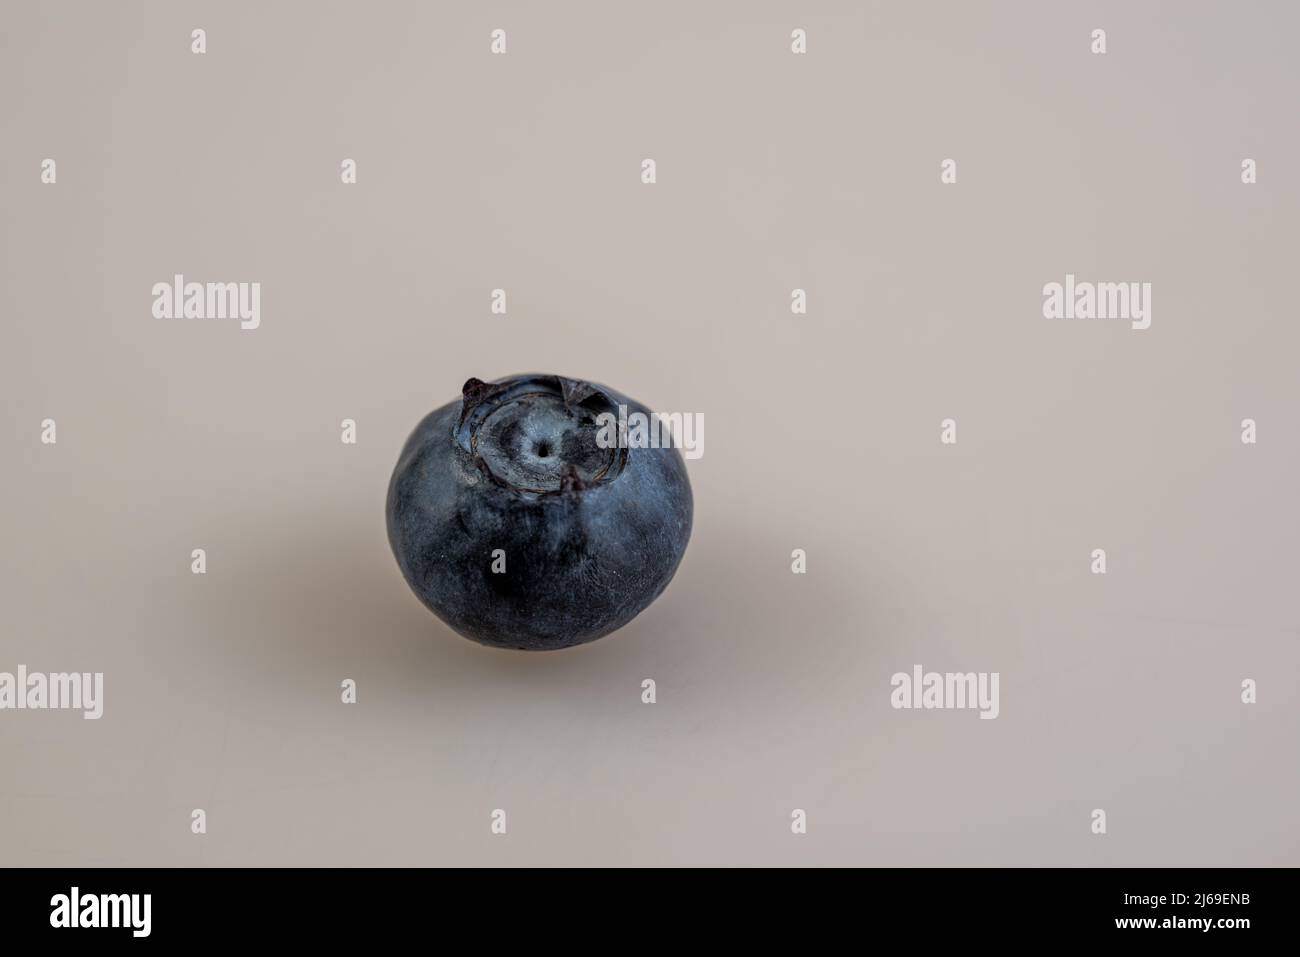 macro shot of a single blueberry against a light background Stock Photo